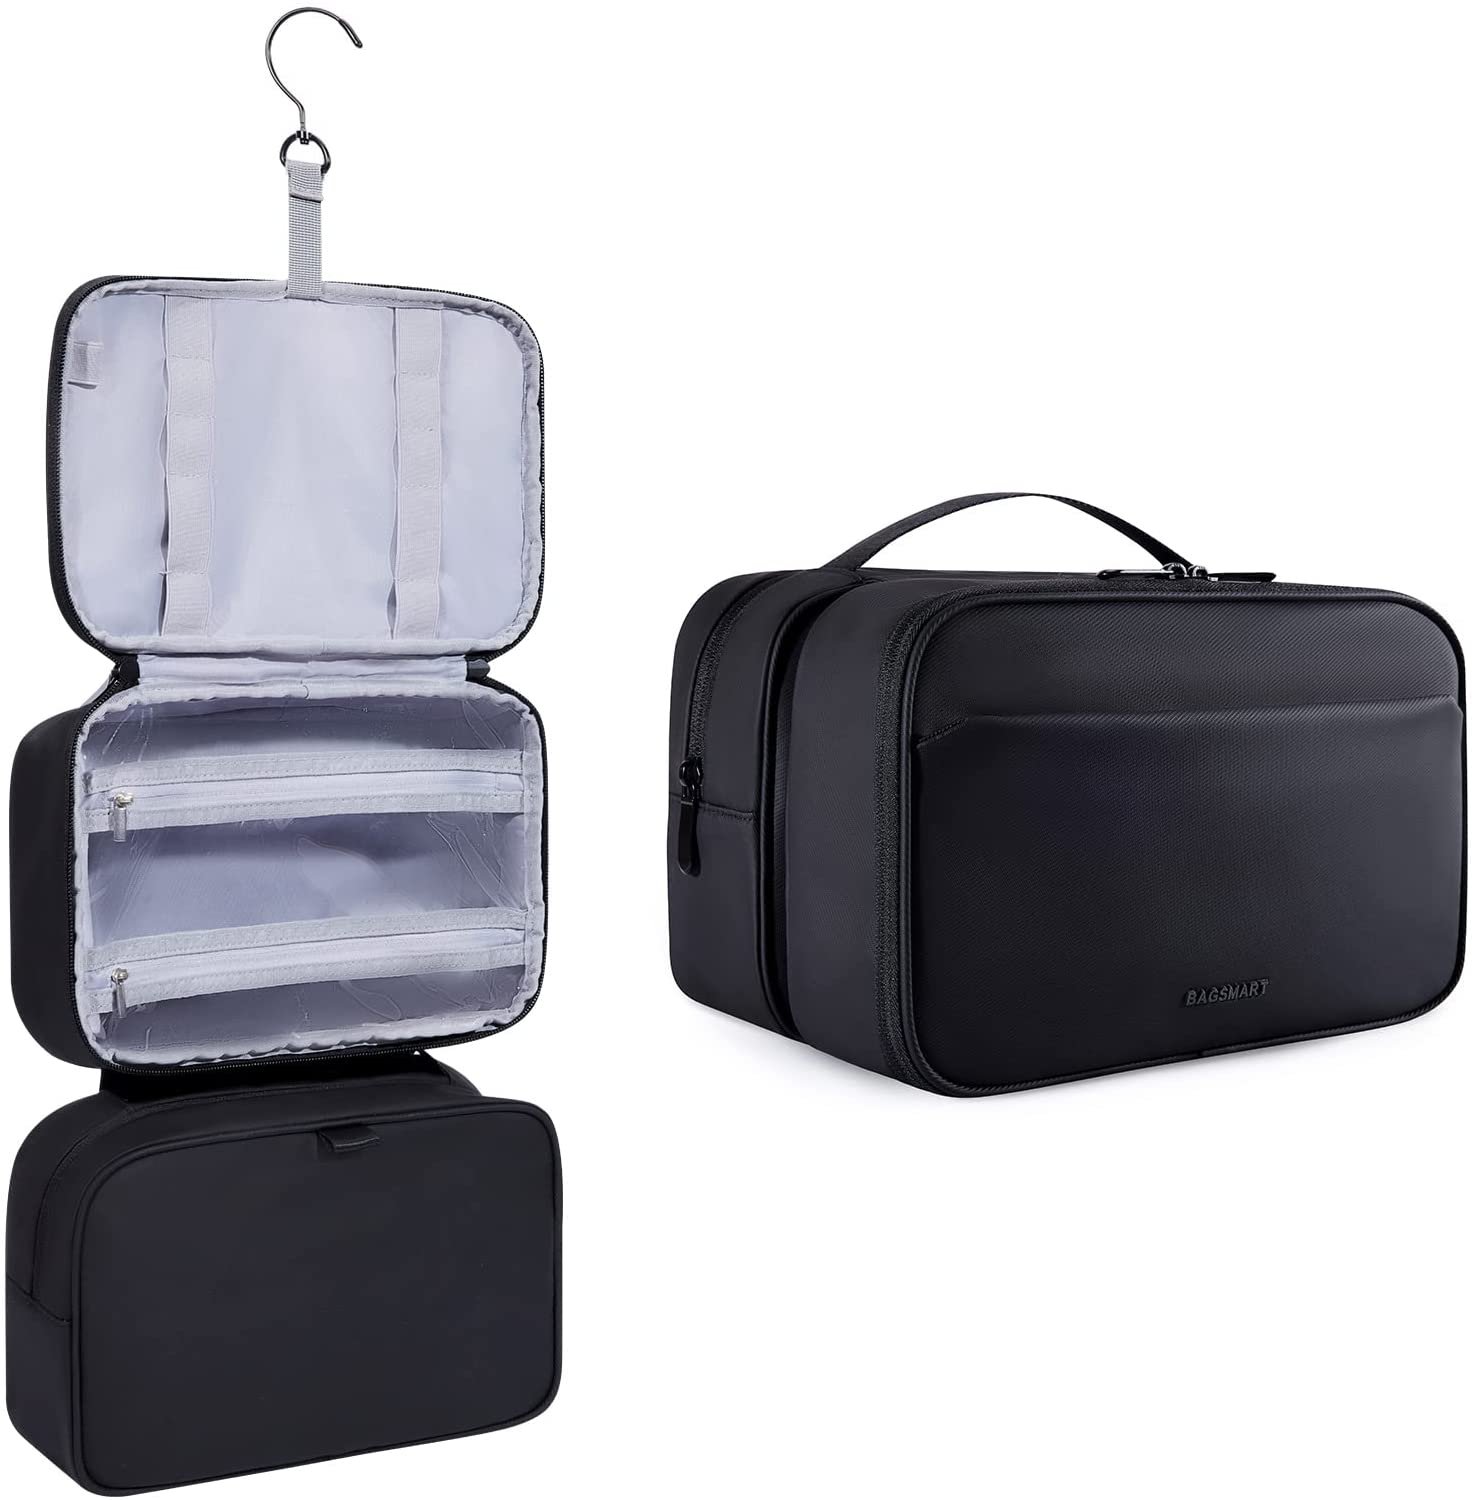 Water Resistant Hanging Travel Toiletry Organizer for Men